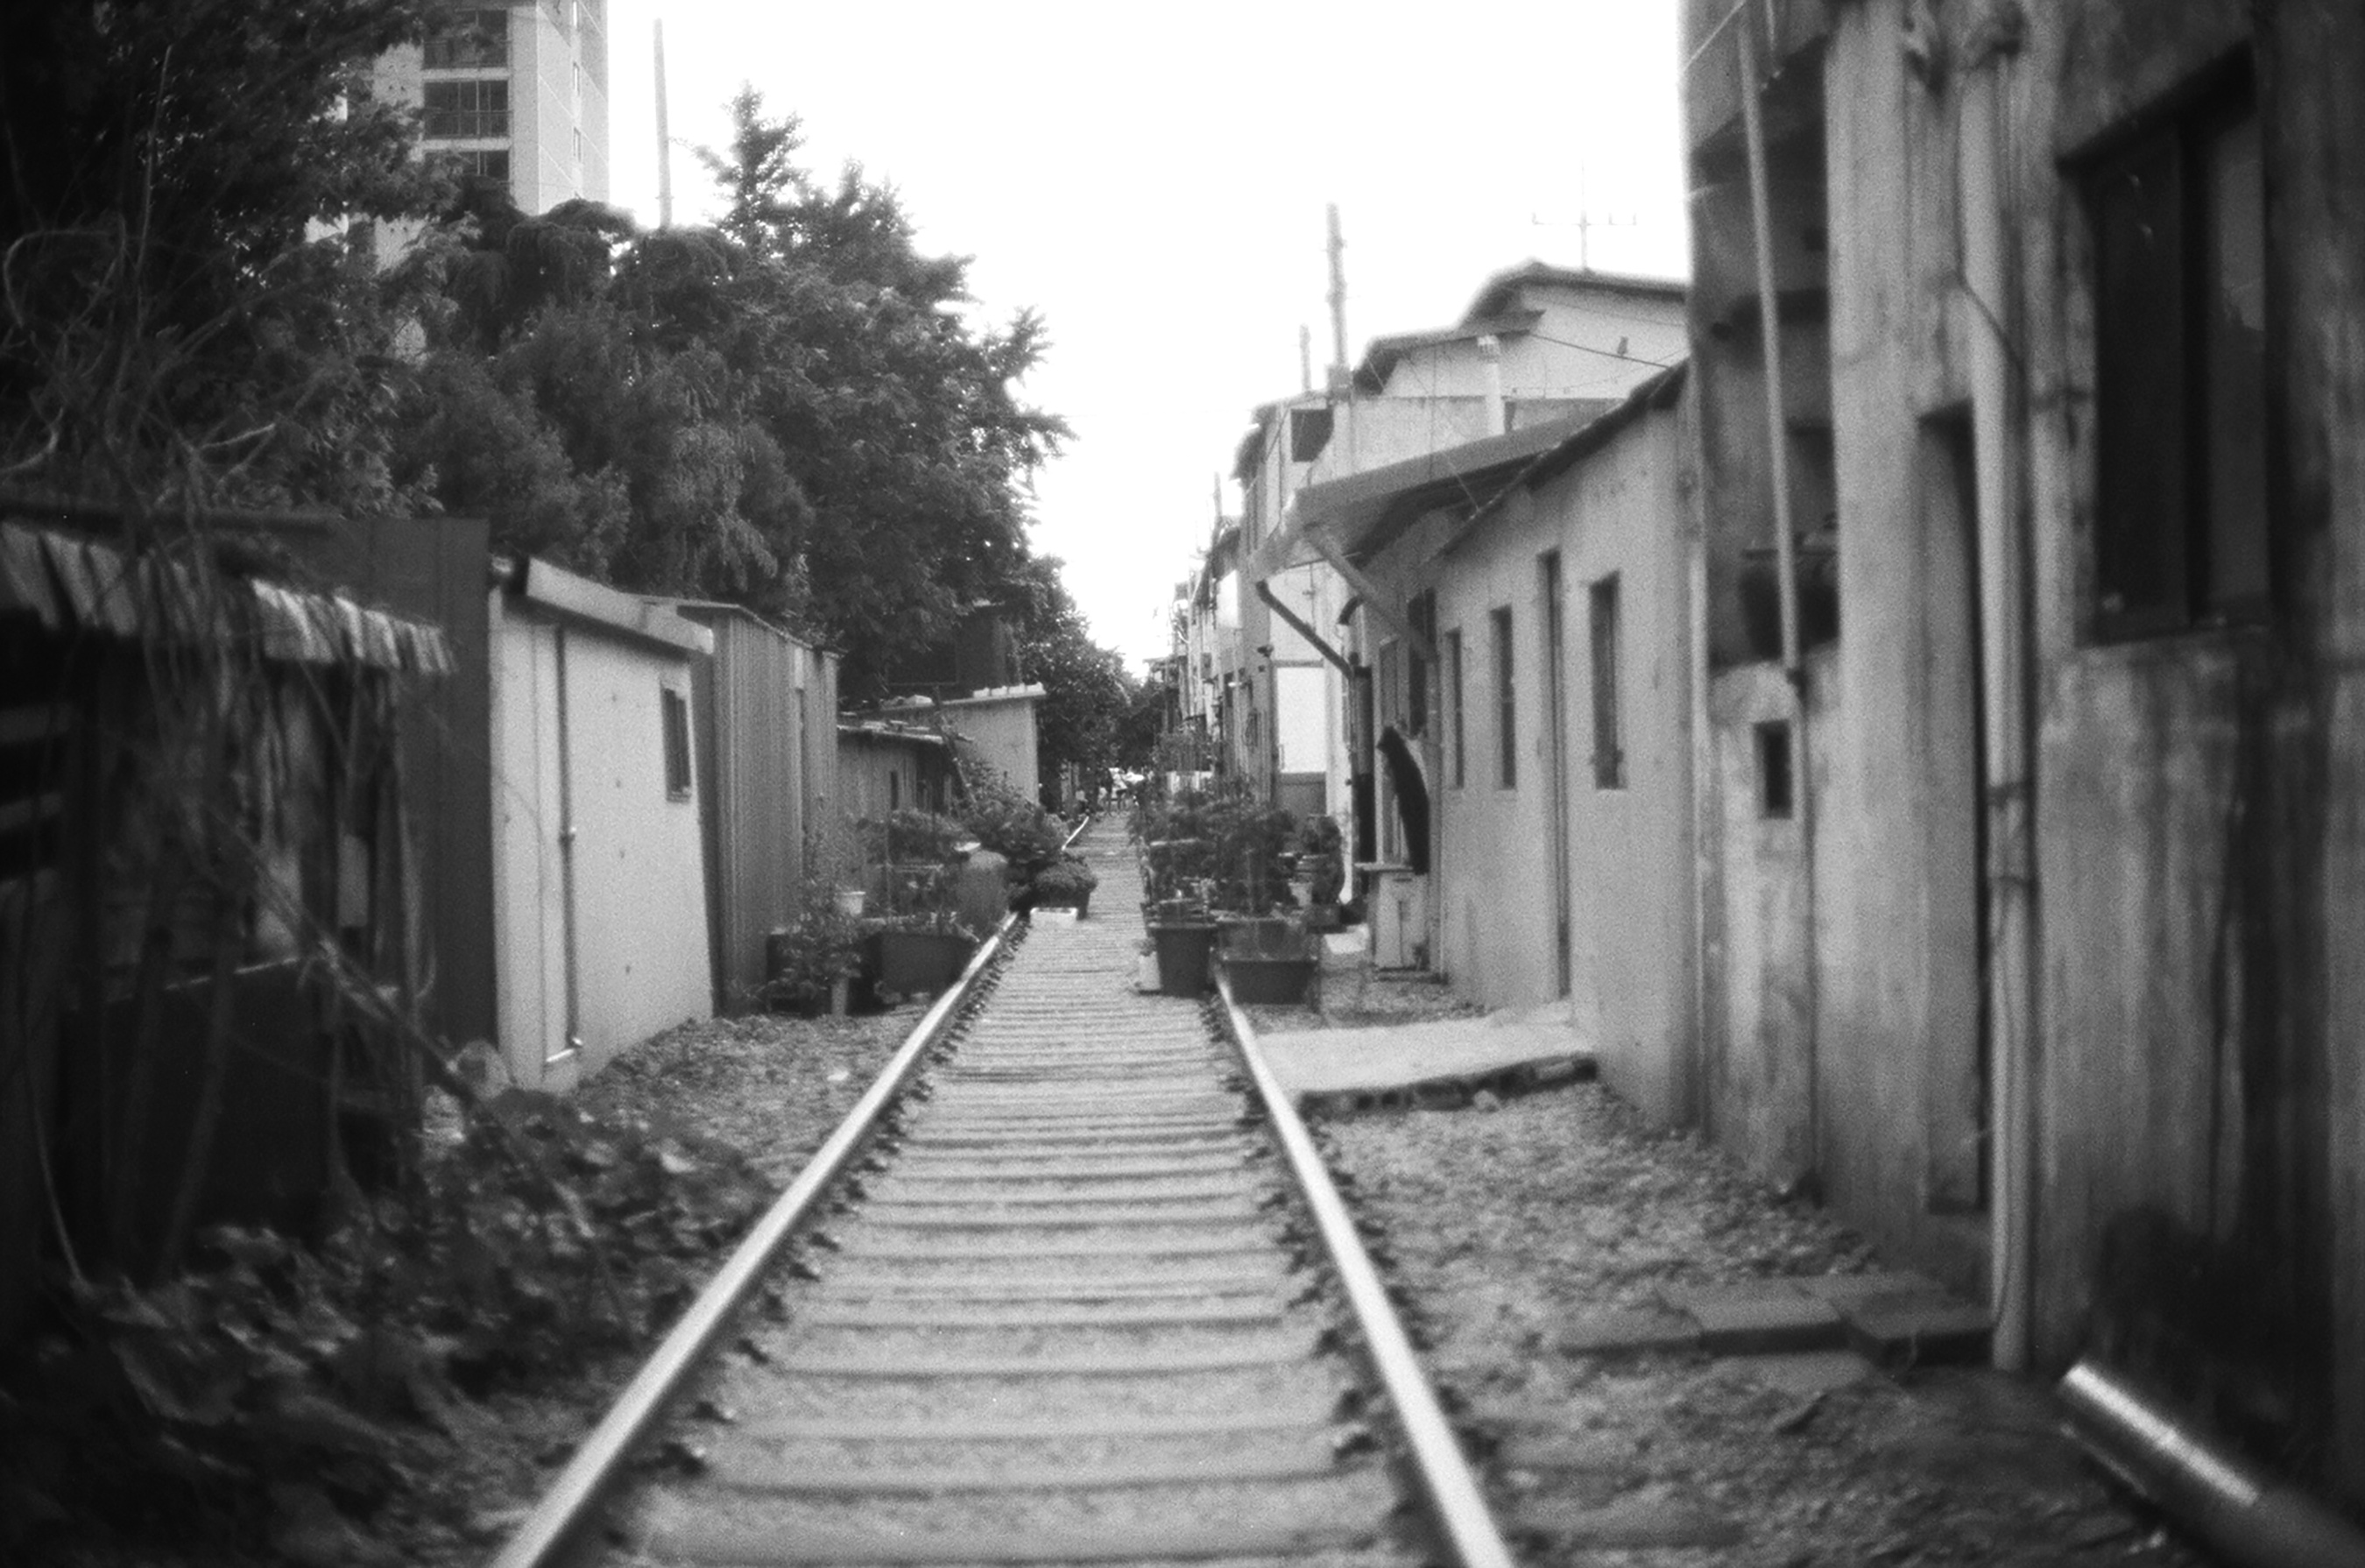 Railroad black and white film photography